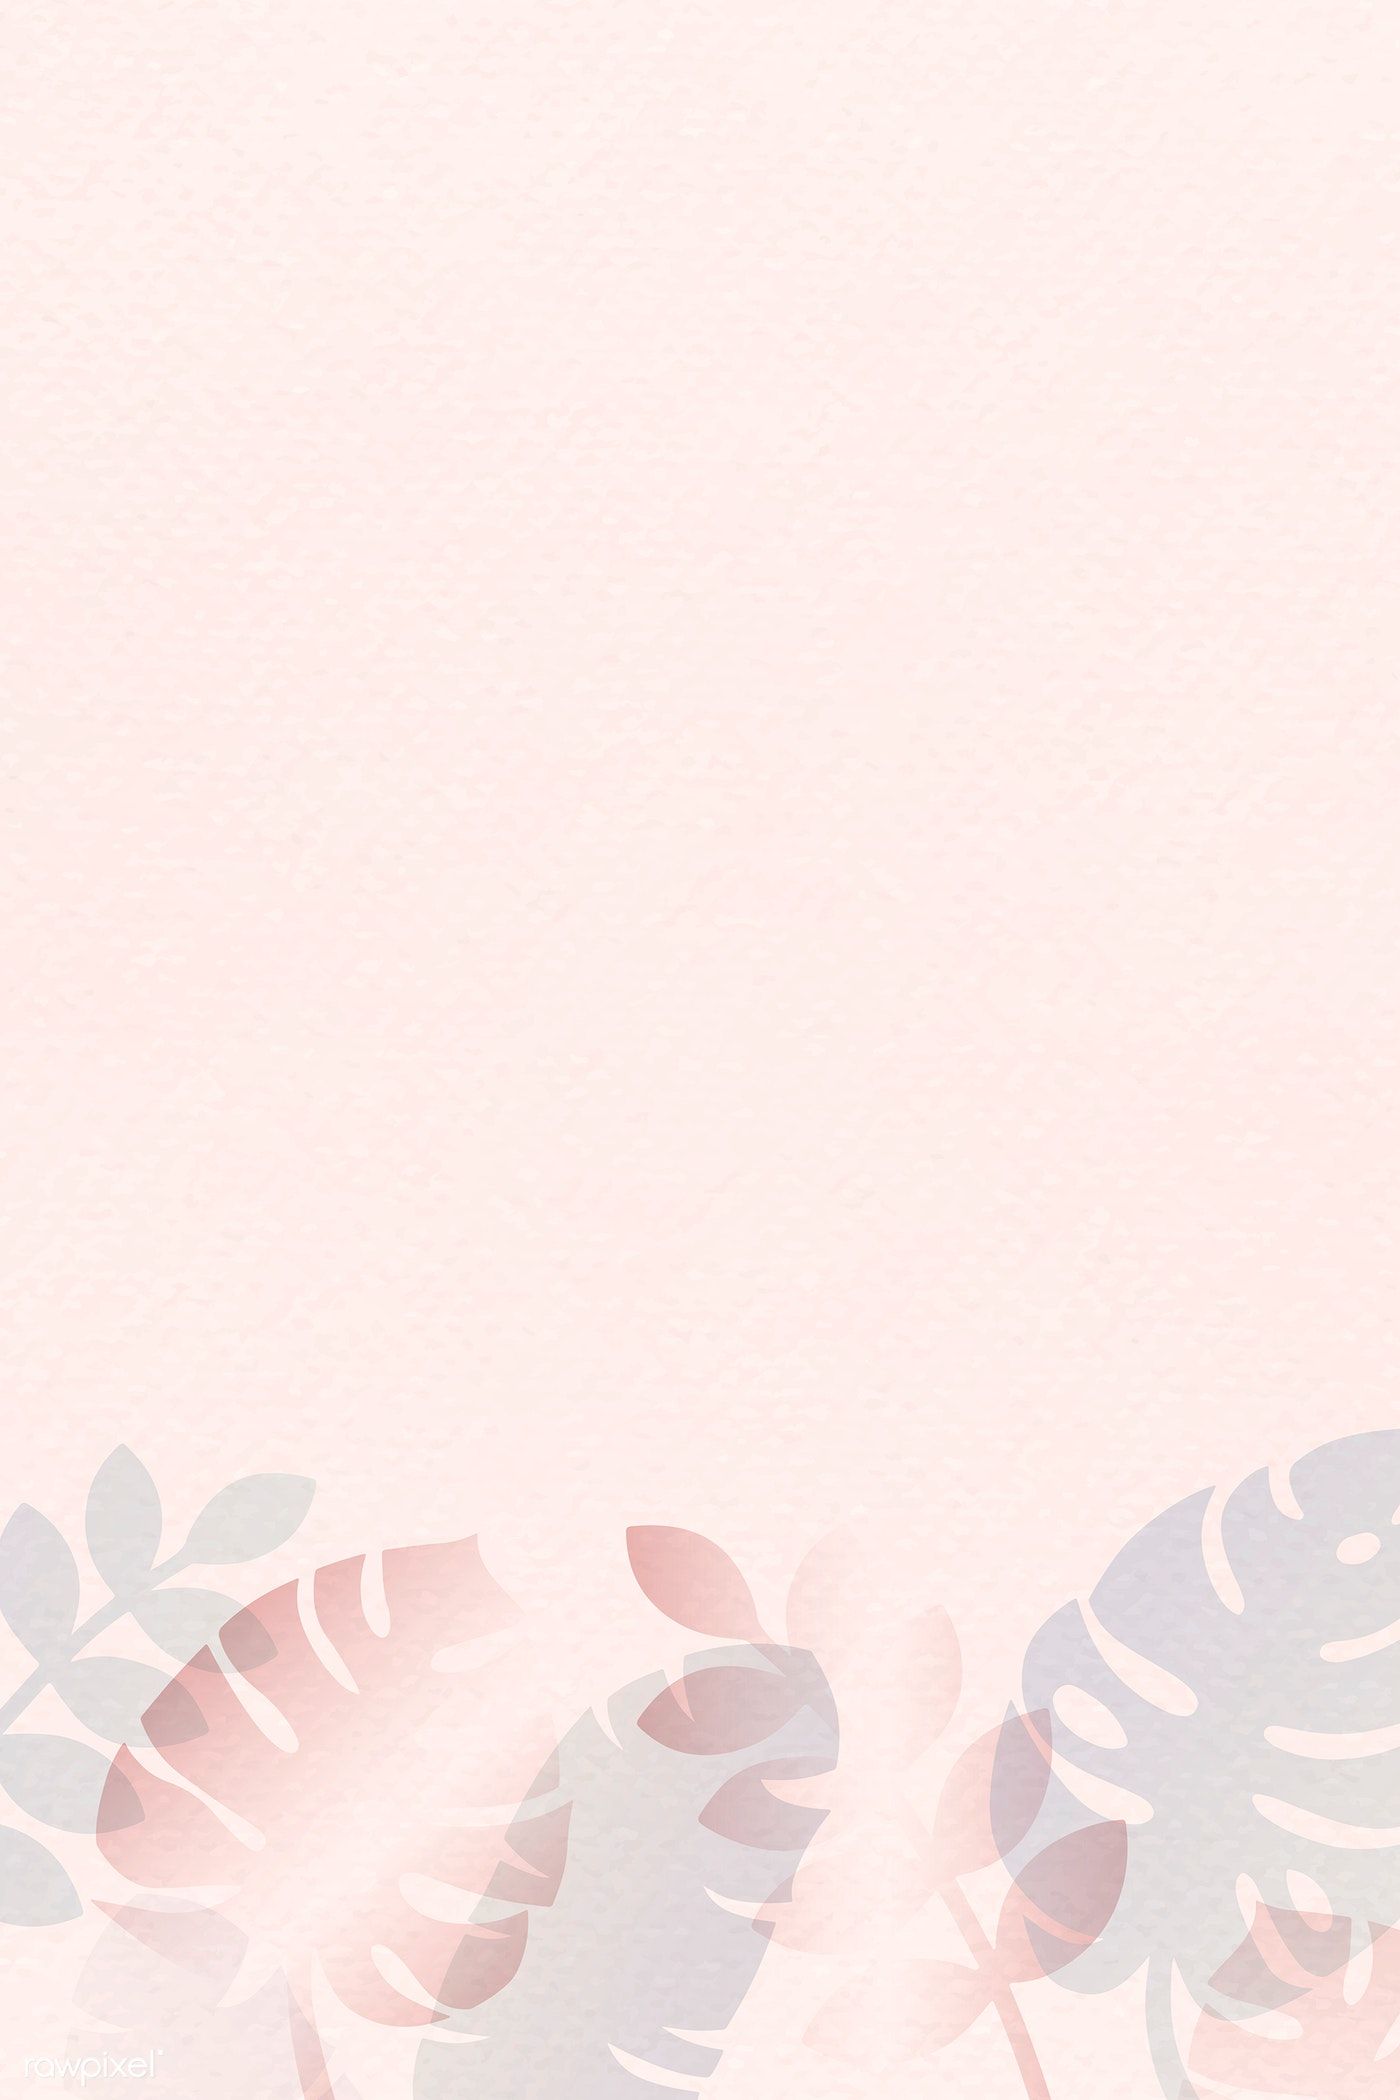 Download premium vector of Tropical leaves pattern on pastel pink. Pastel background wallpaper, Tropical leaves pattern, Pink wallpaper background